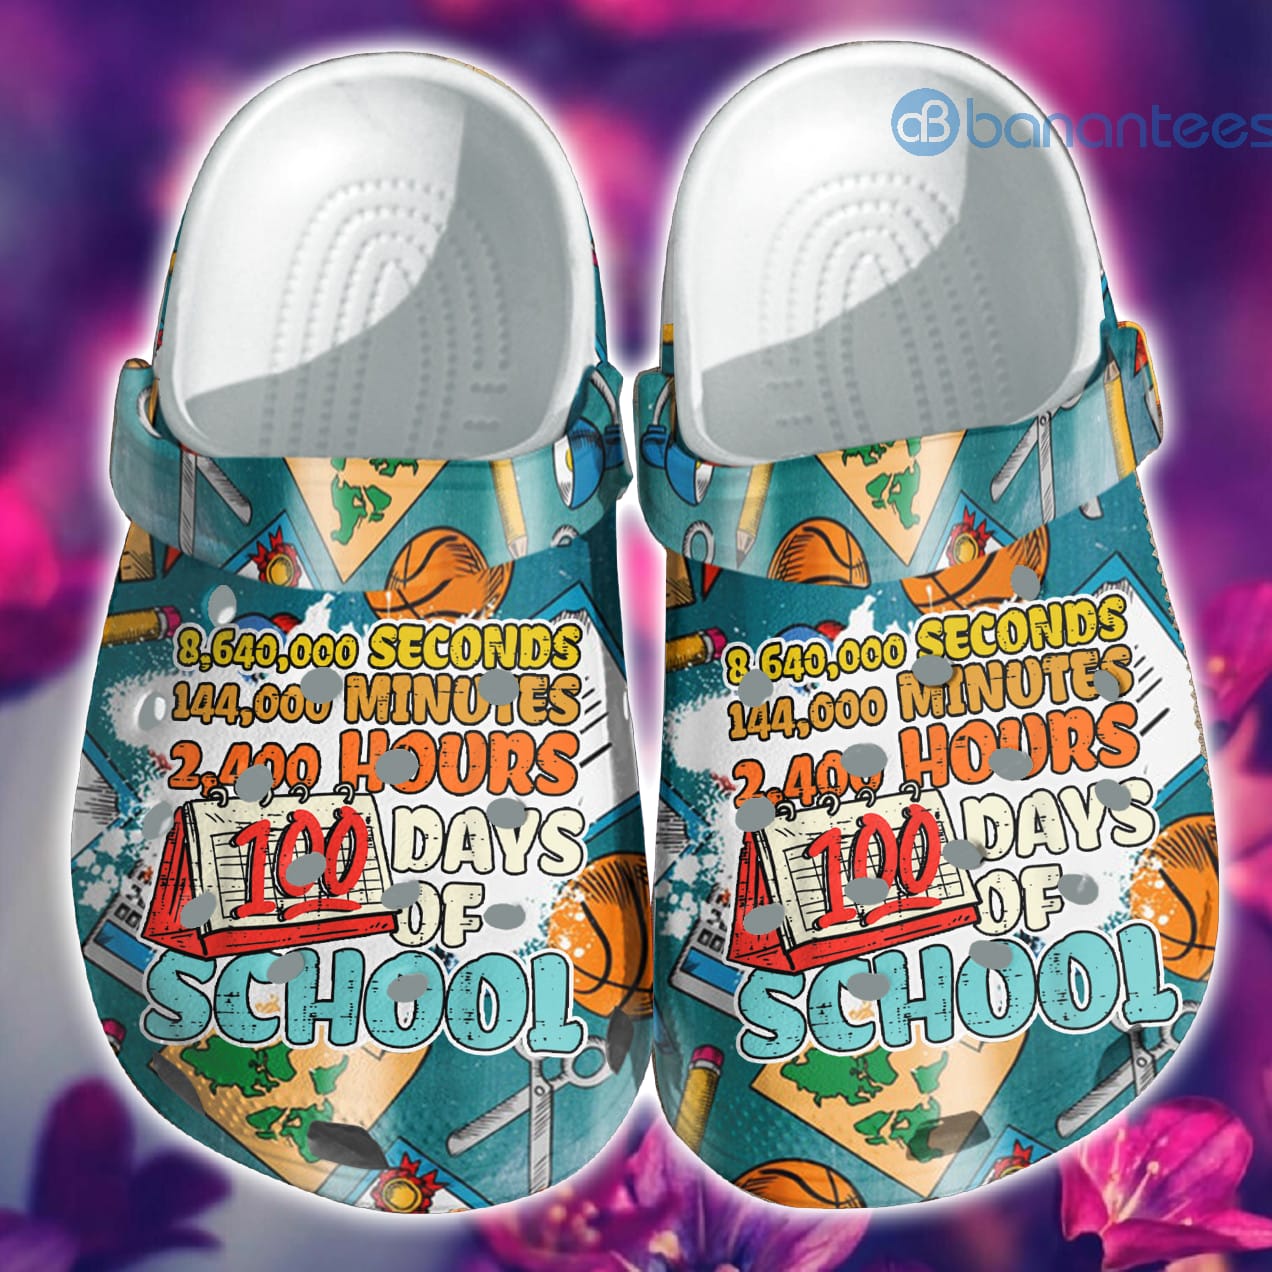 2400 Hours 100 Days Of Schoolleopard Clog Shoes For Men And Women